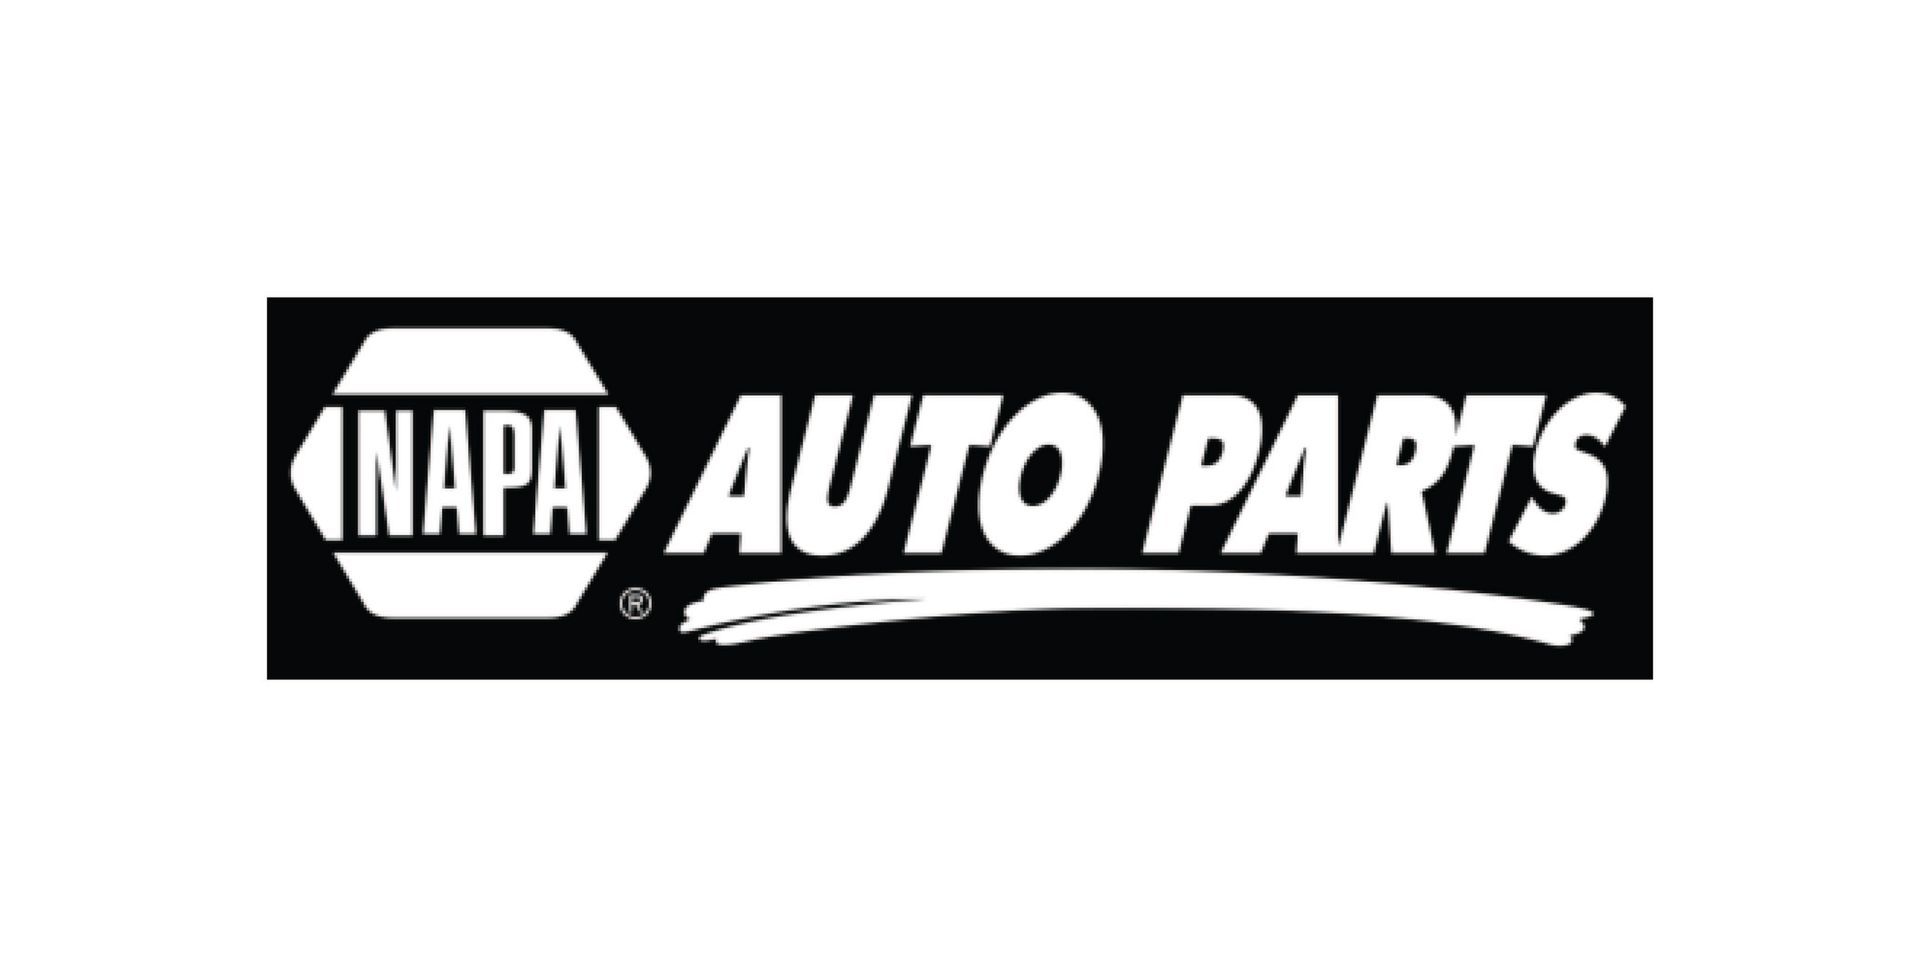 A black and white logo for napa auto parts on a white background.